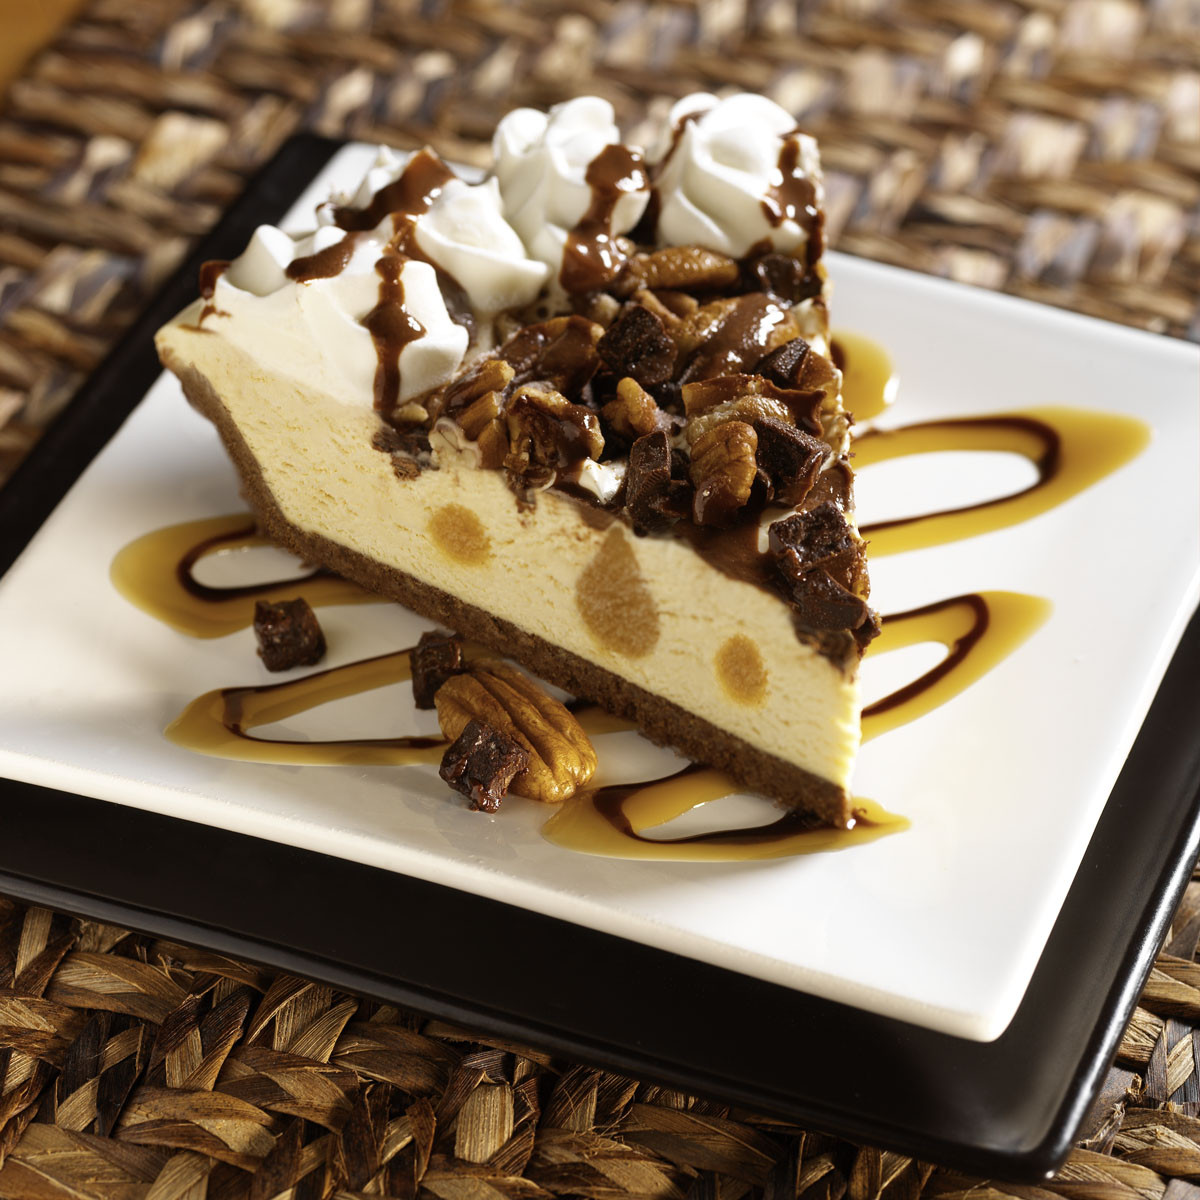 Gourmet Pie Recipes
 Edwards New Desserts Win Blue Ribbons at National Pie